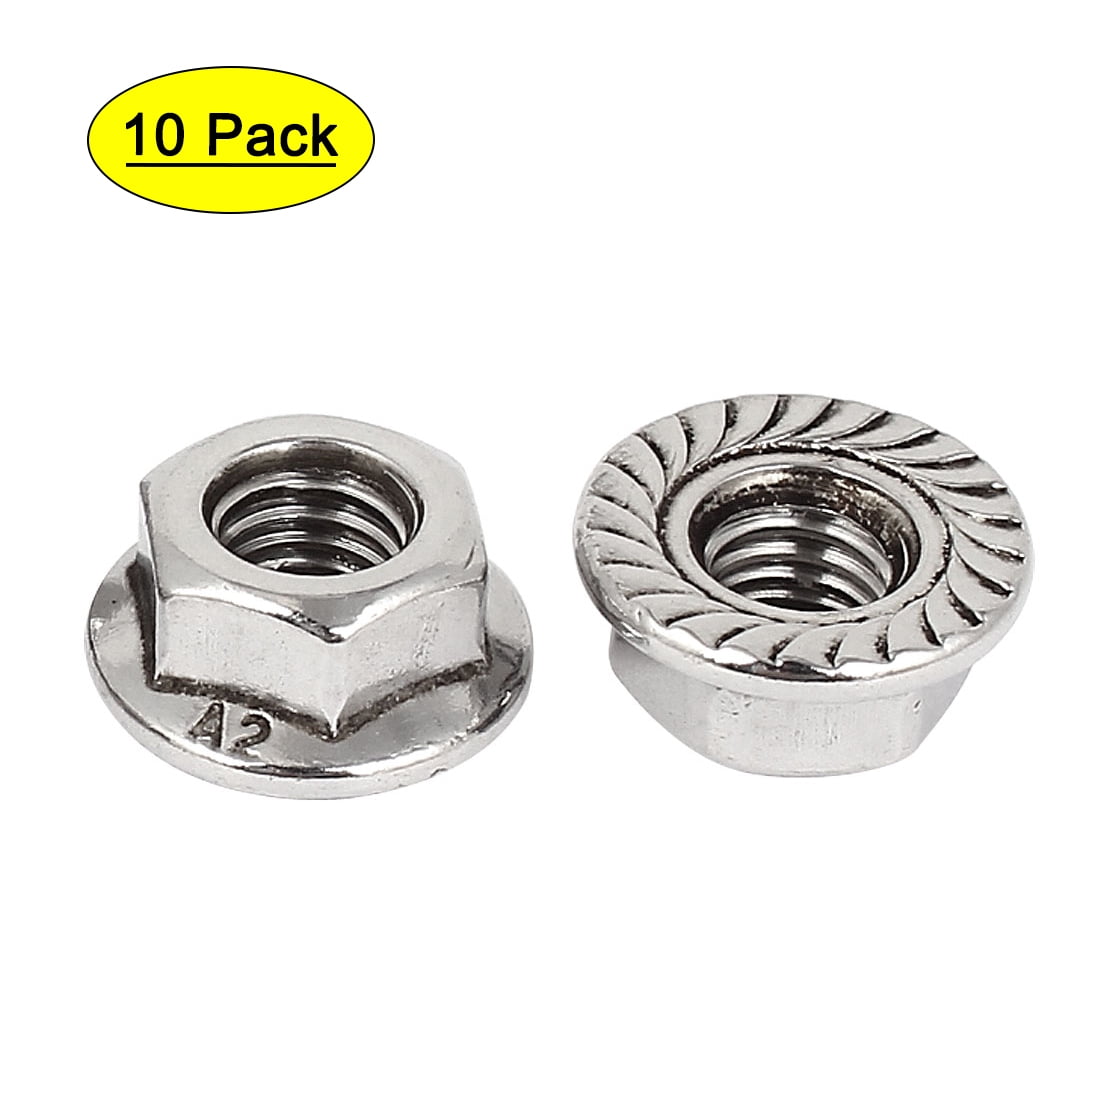 Qty 250 5/16-18 Stainless Steel Hex Flange Nut Locknuts Serrated GRADE 316 